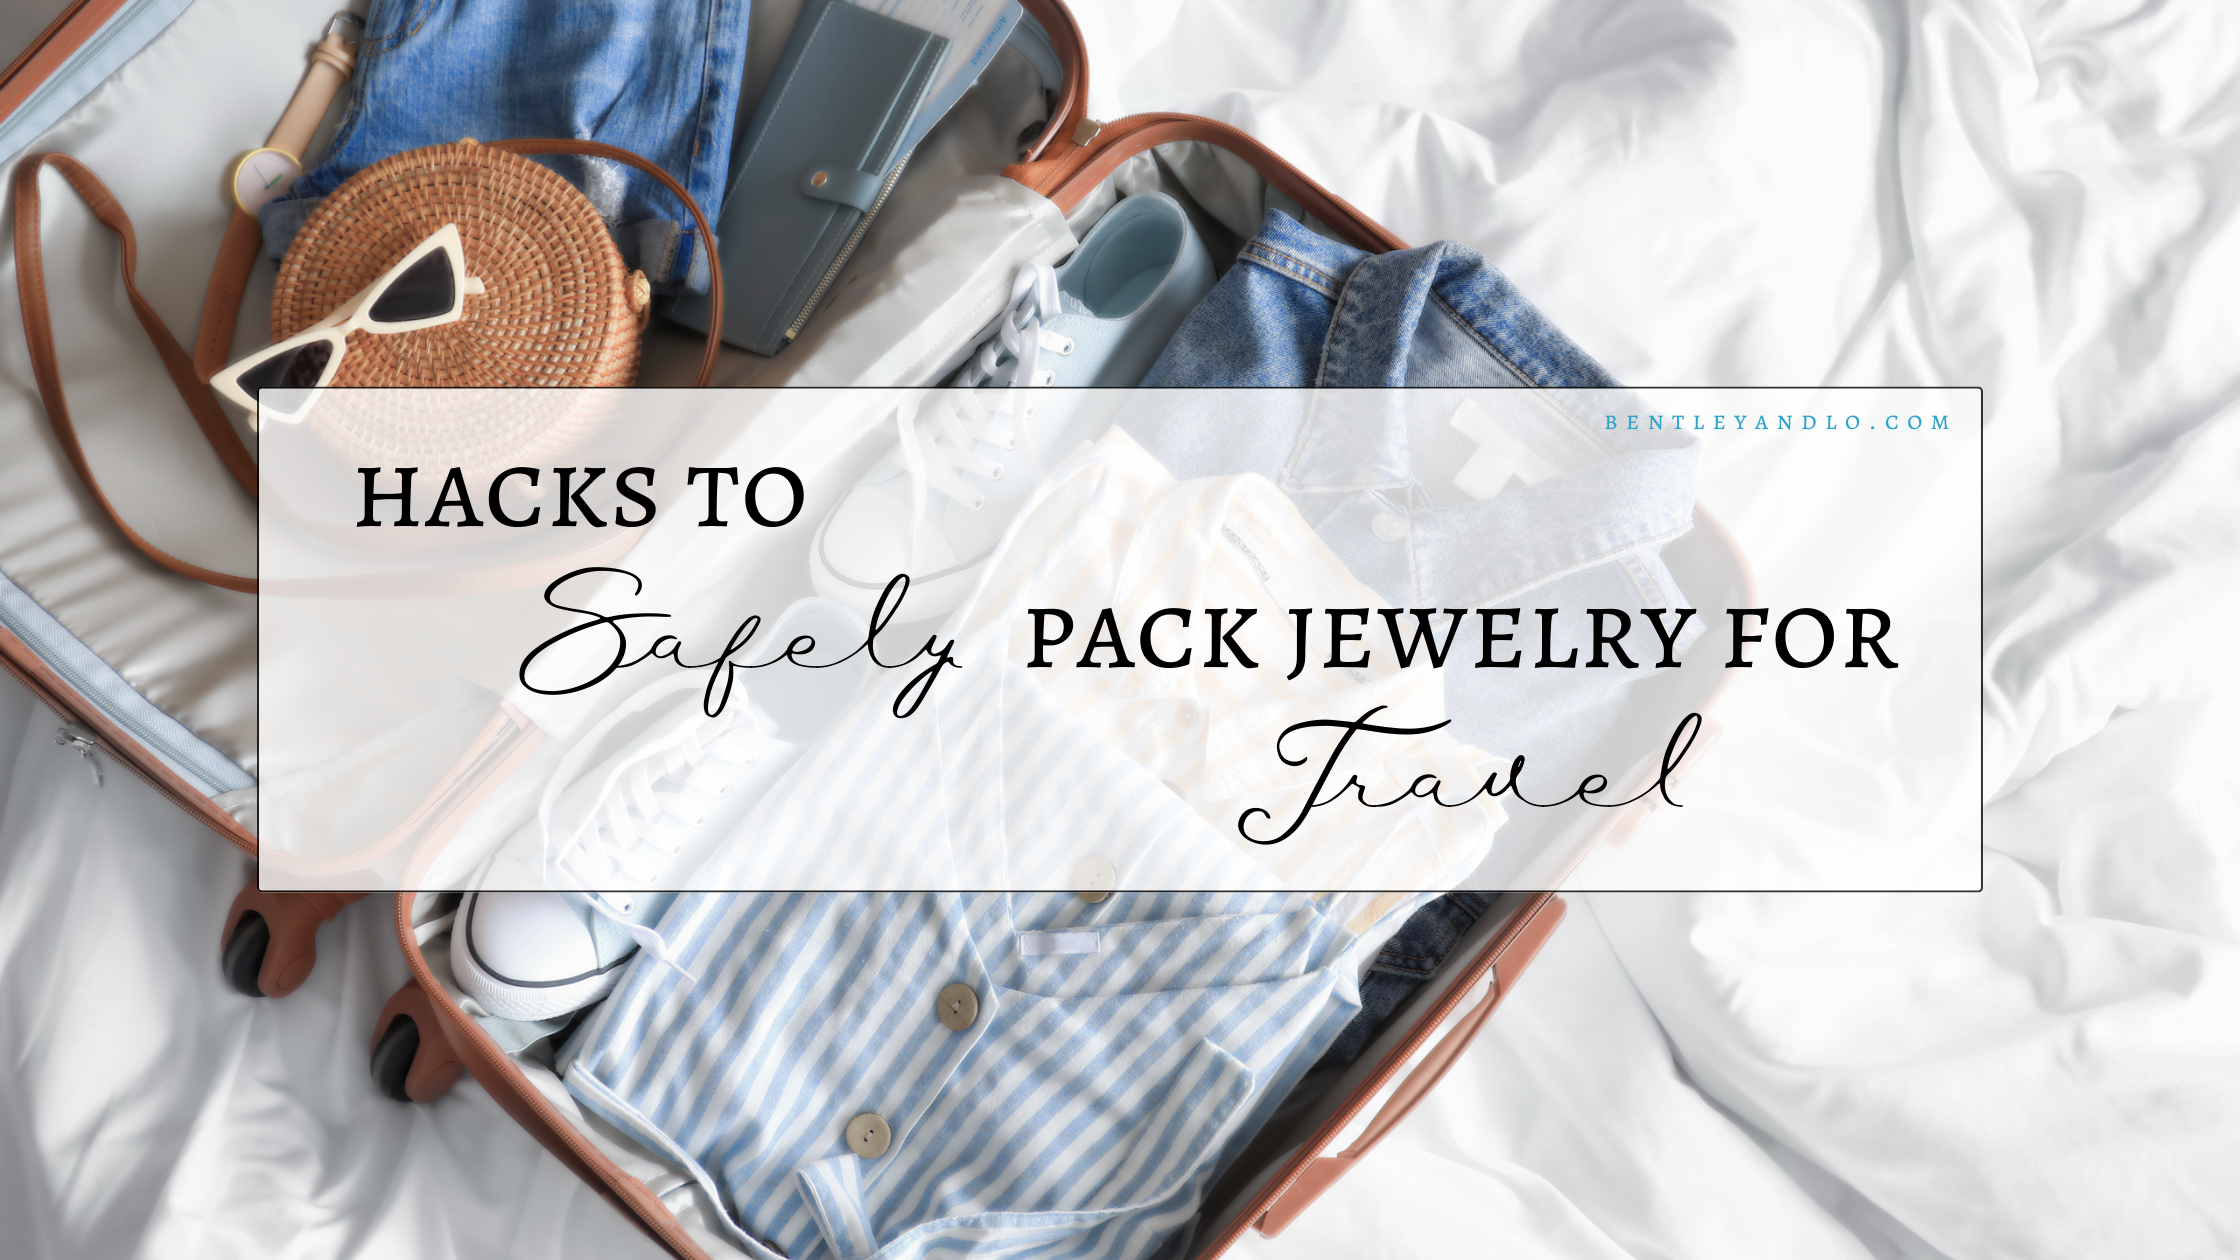 Hacks to Safely Pack Jewelry for Travel